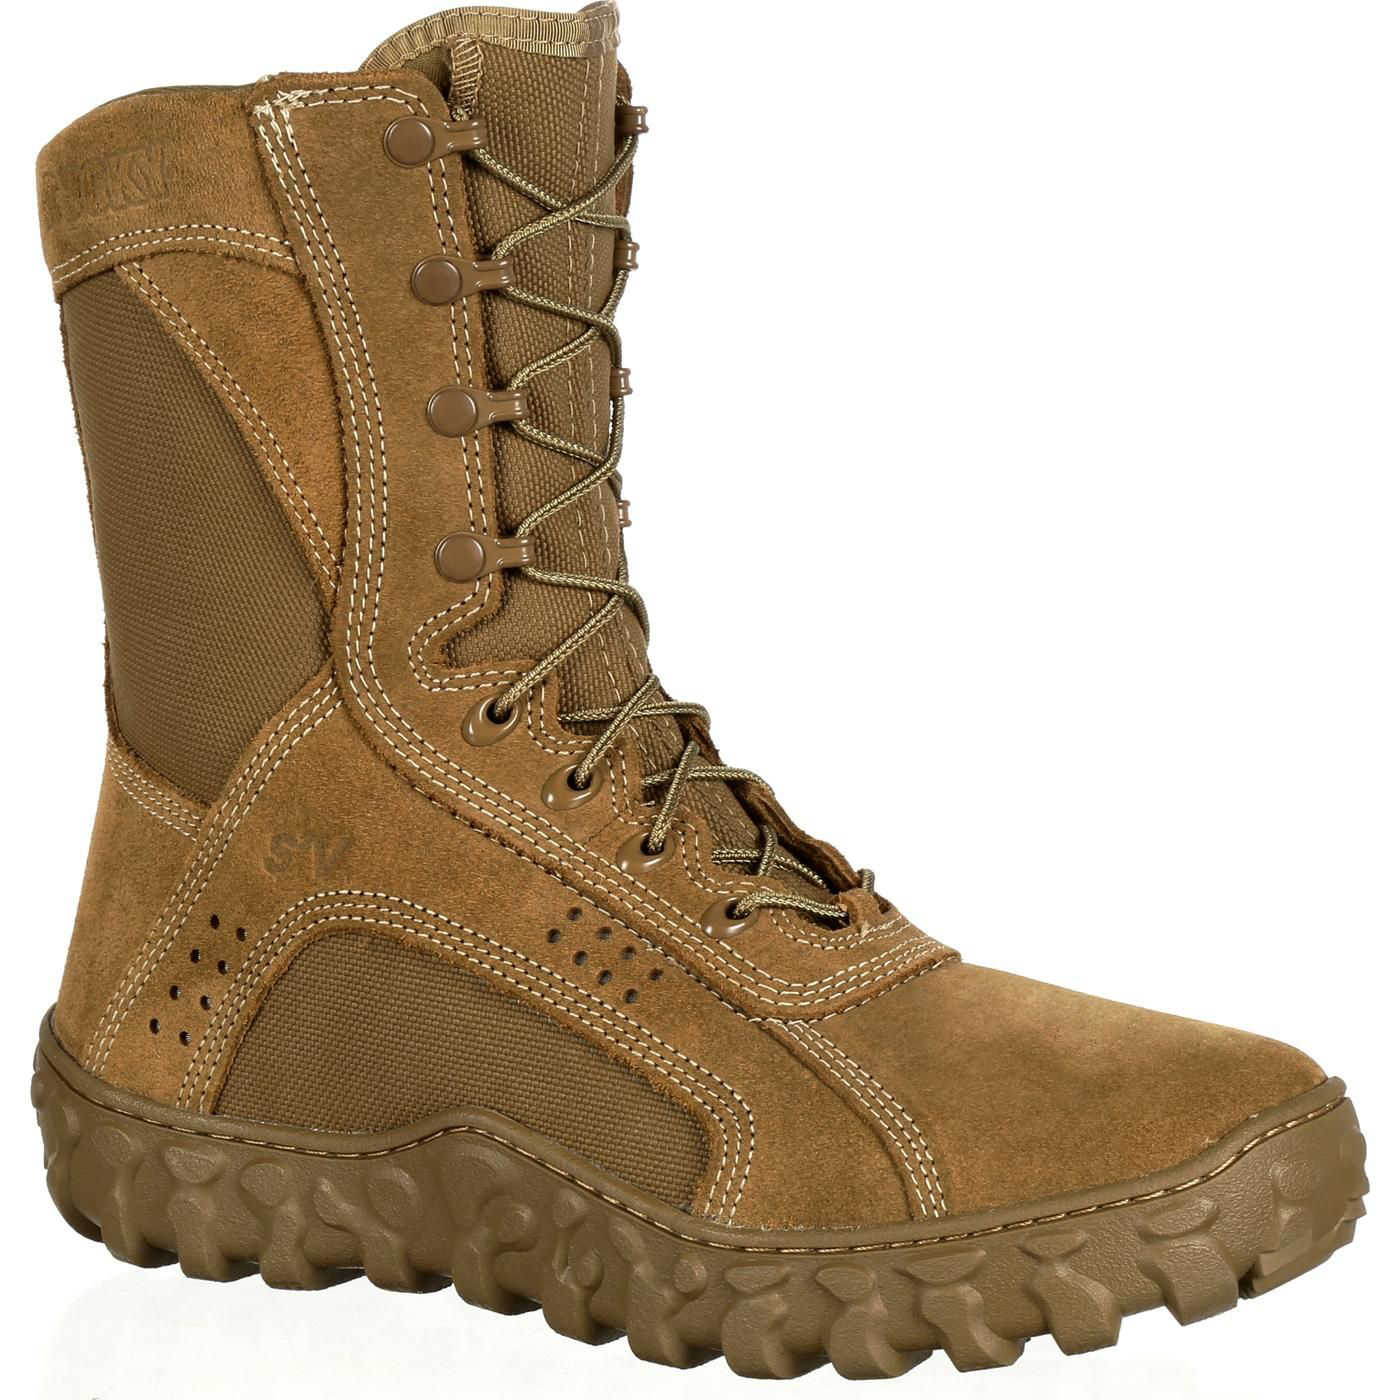 Rocky S2V Tactical Military Boots for Men - Coyote Brown - 4M